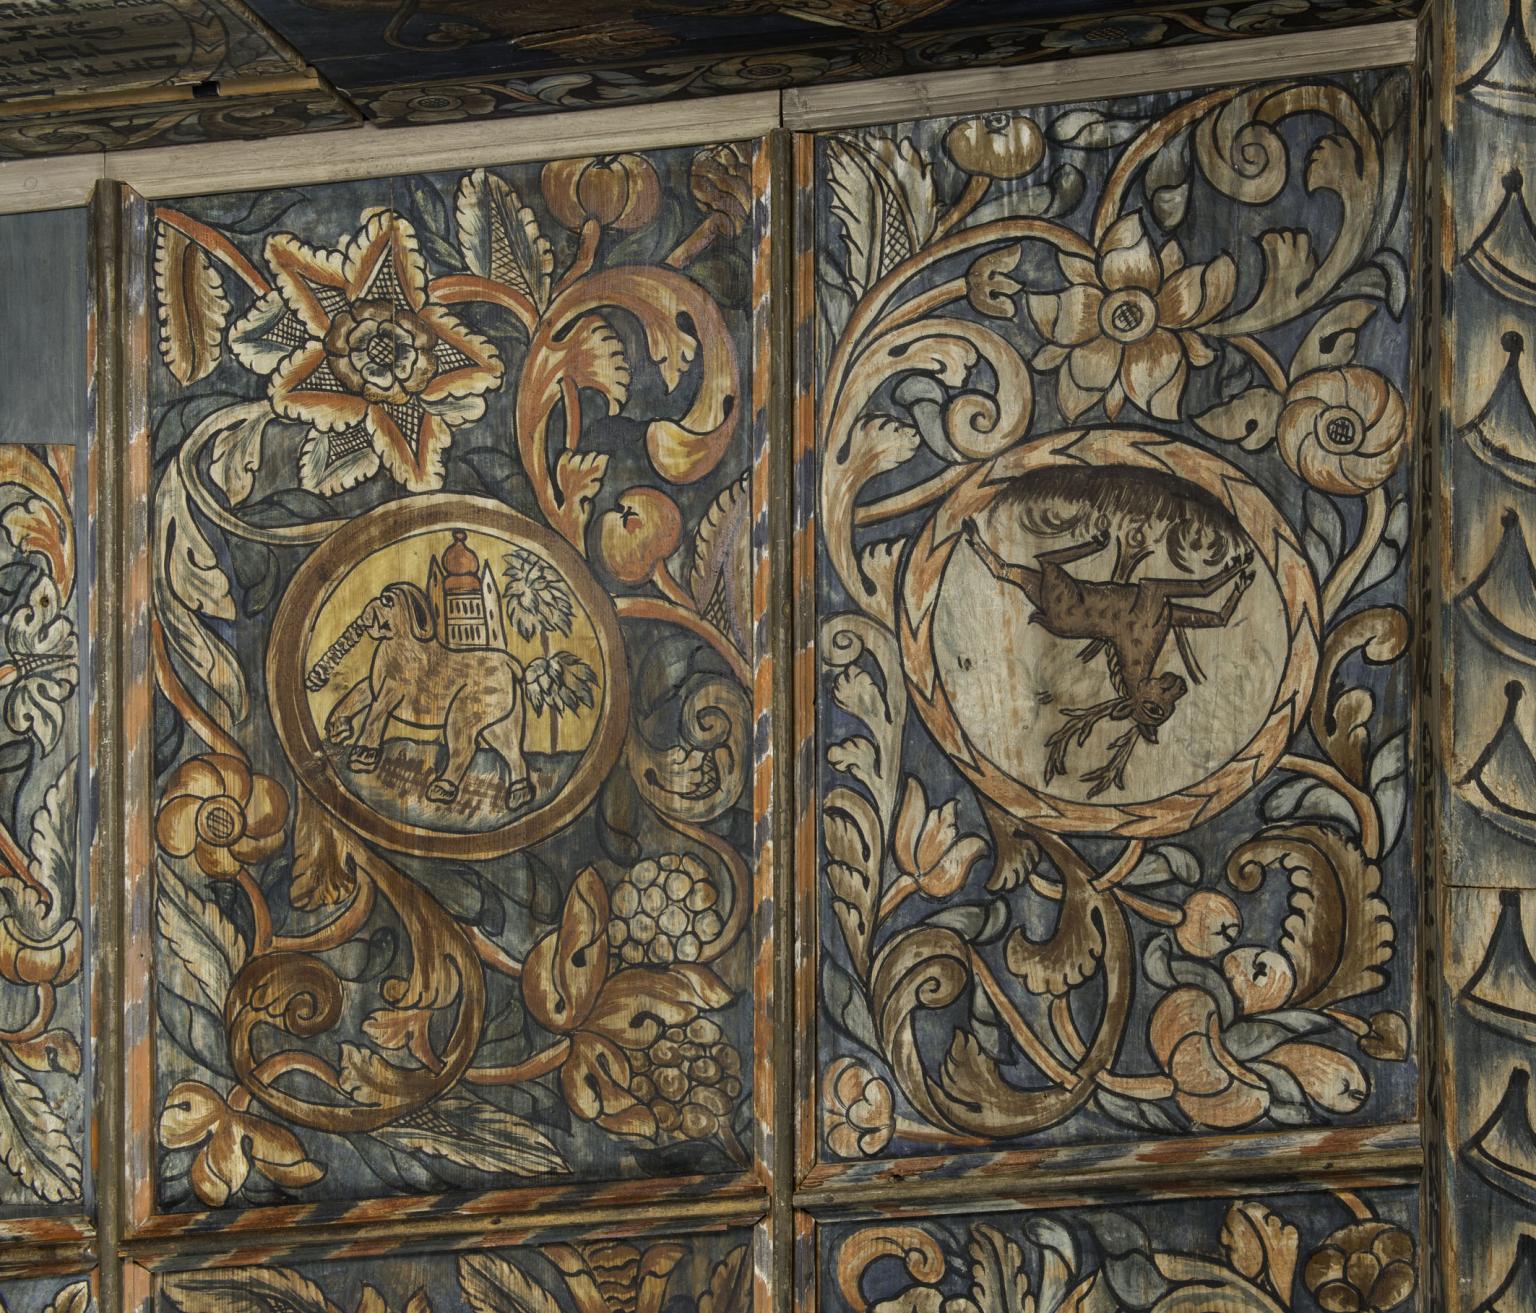 Close-up photograph of wood wall painted with foliage and image of elephant carrying castle and upside-down deer.